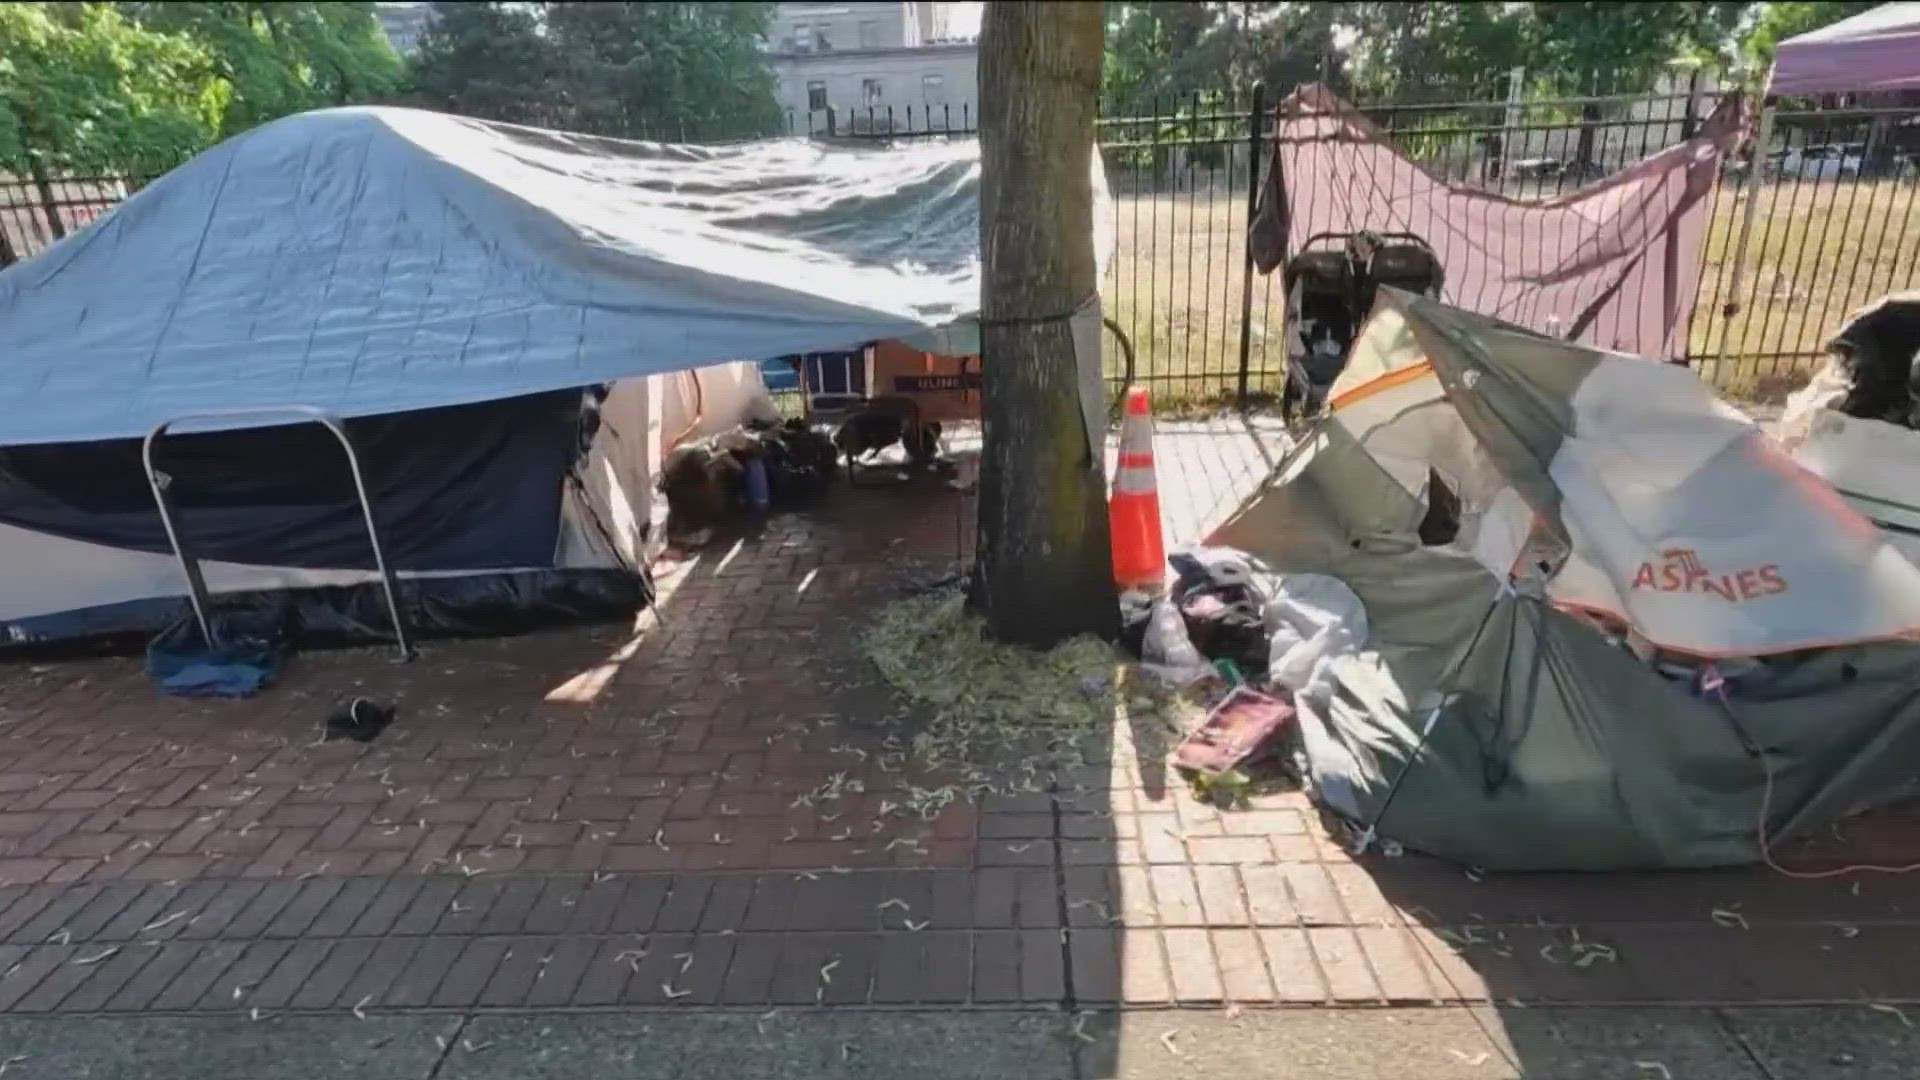 Grants Pass is also challenging a 2018 decision, known as Martin v. Boise, that first barred camping bans when shelter space is lacking.